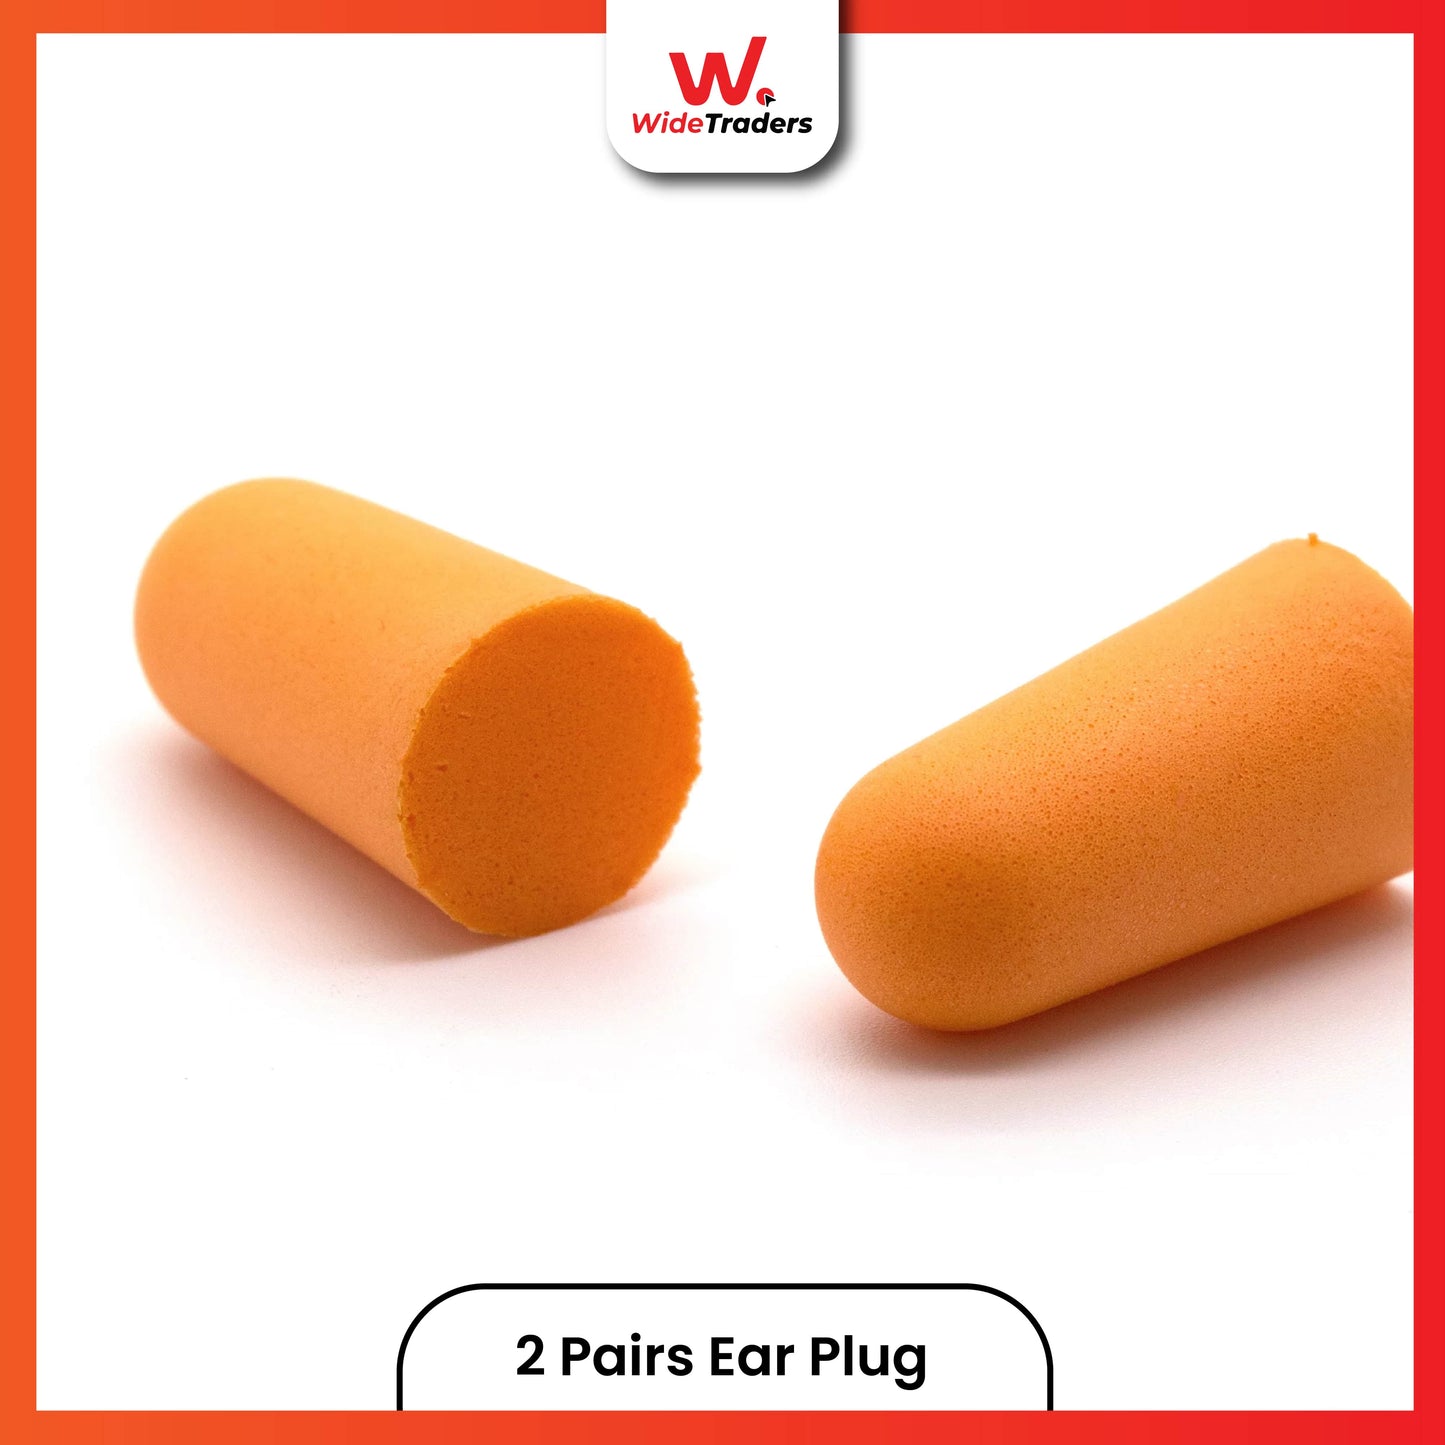 2 Pair of Noise Prevention Ear Plugs